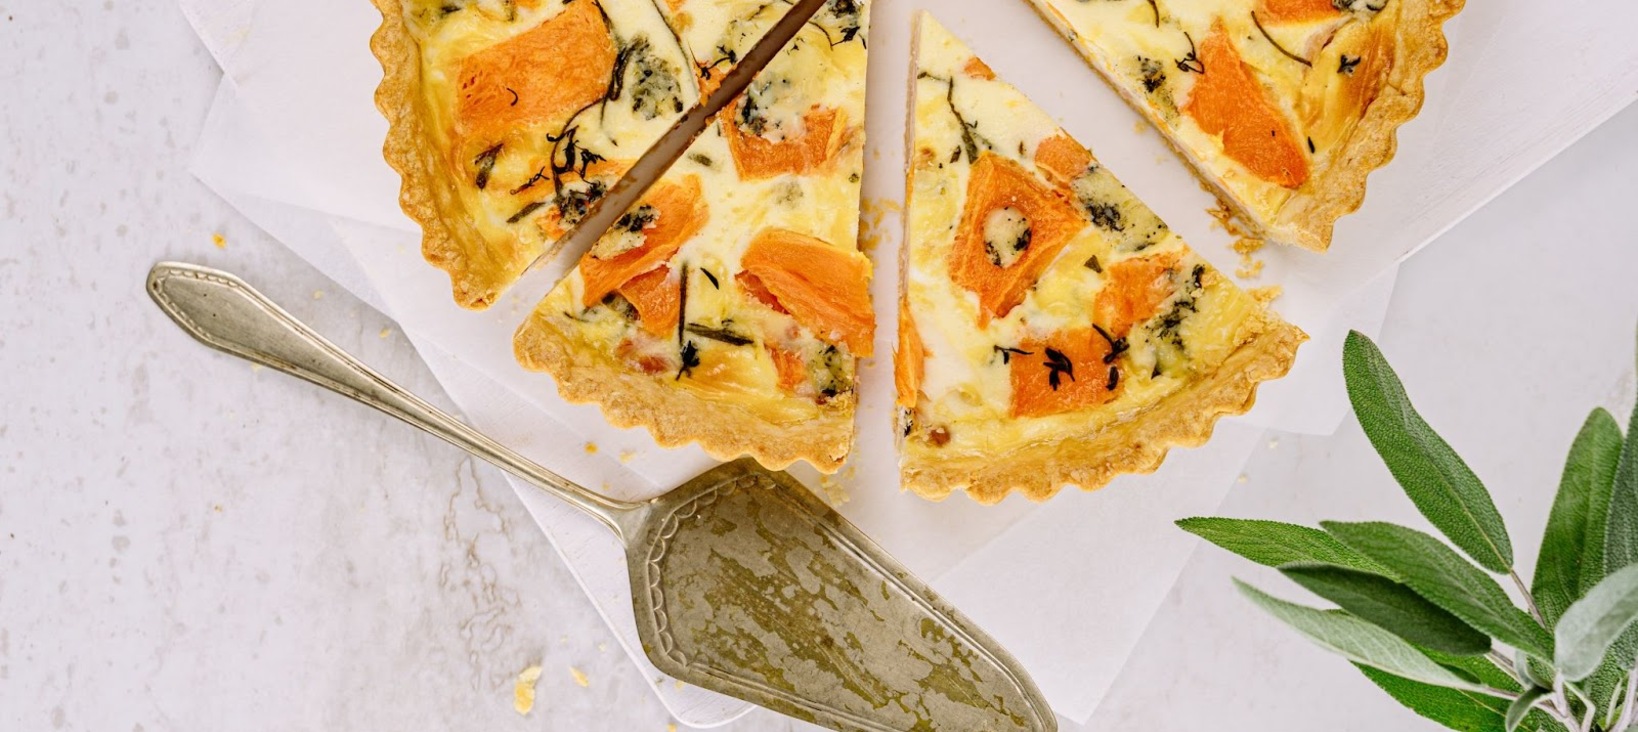 A photo of a savory pie or quiche, cut into several slices on a white counter top. Next to the pie is a serving spoon and some sage leaves.